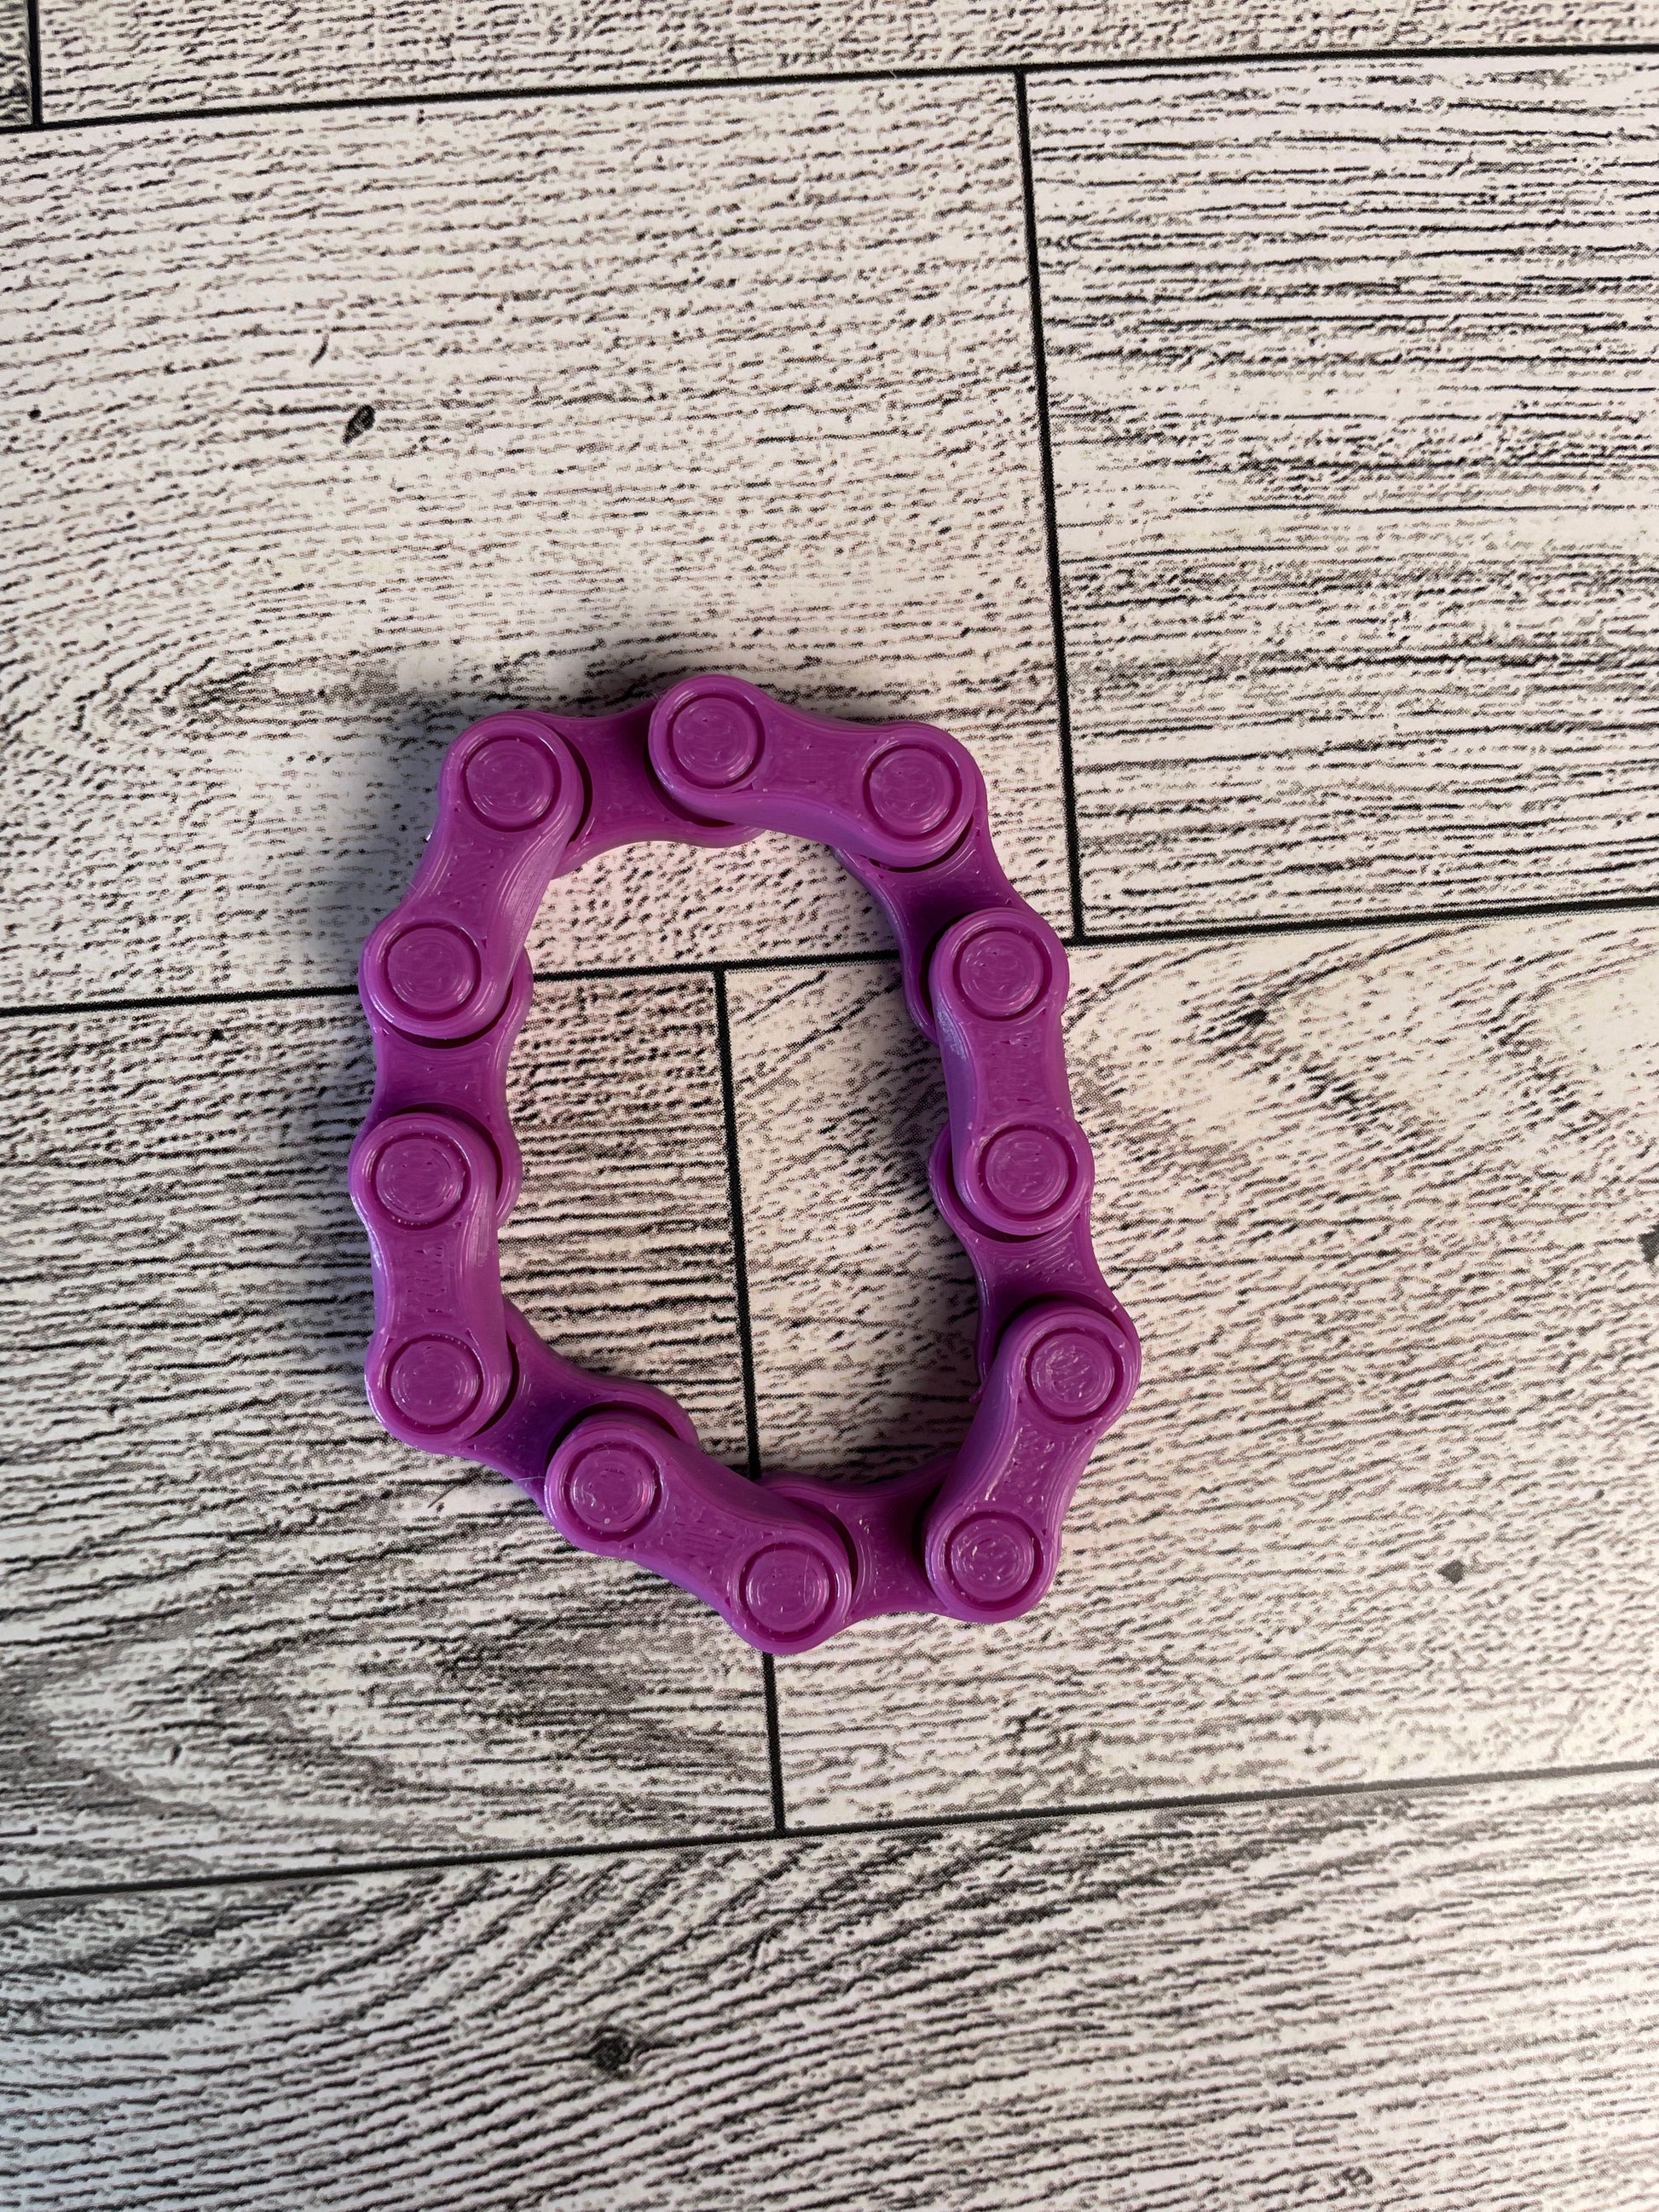 A purple chain link on a wood backdrop. The chain is arranged in a oval shape and there are six links.